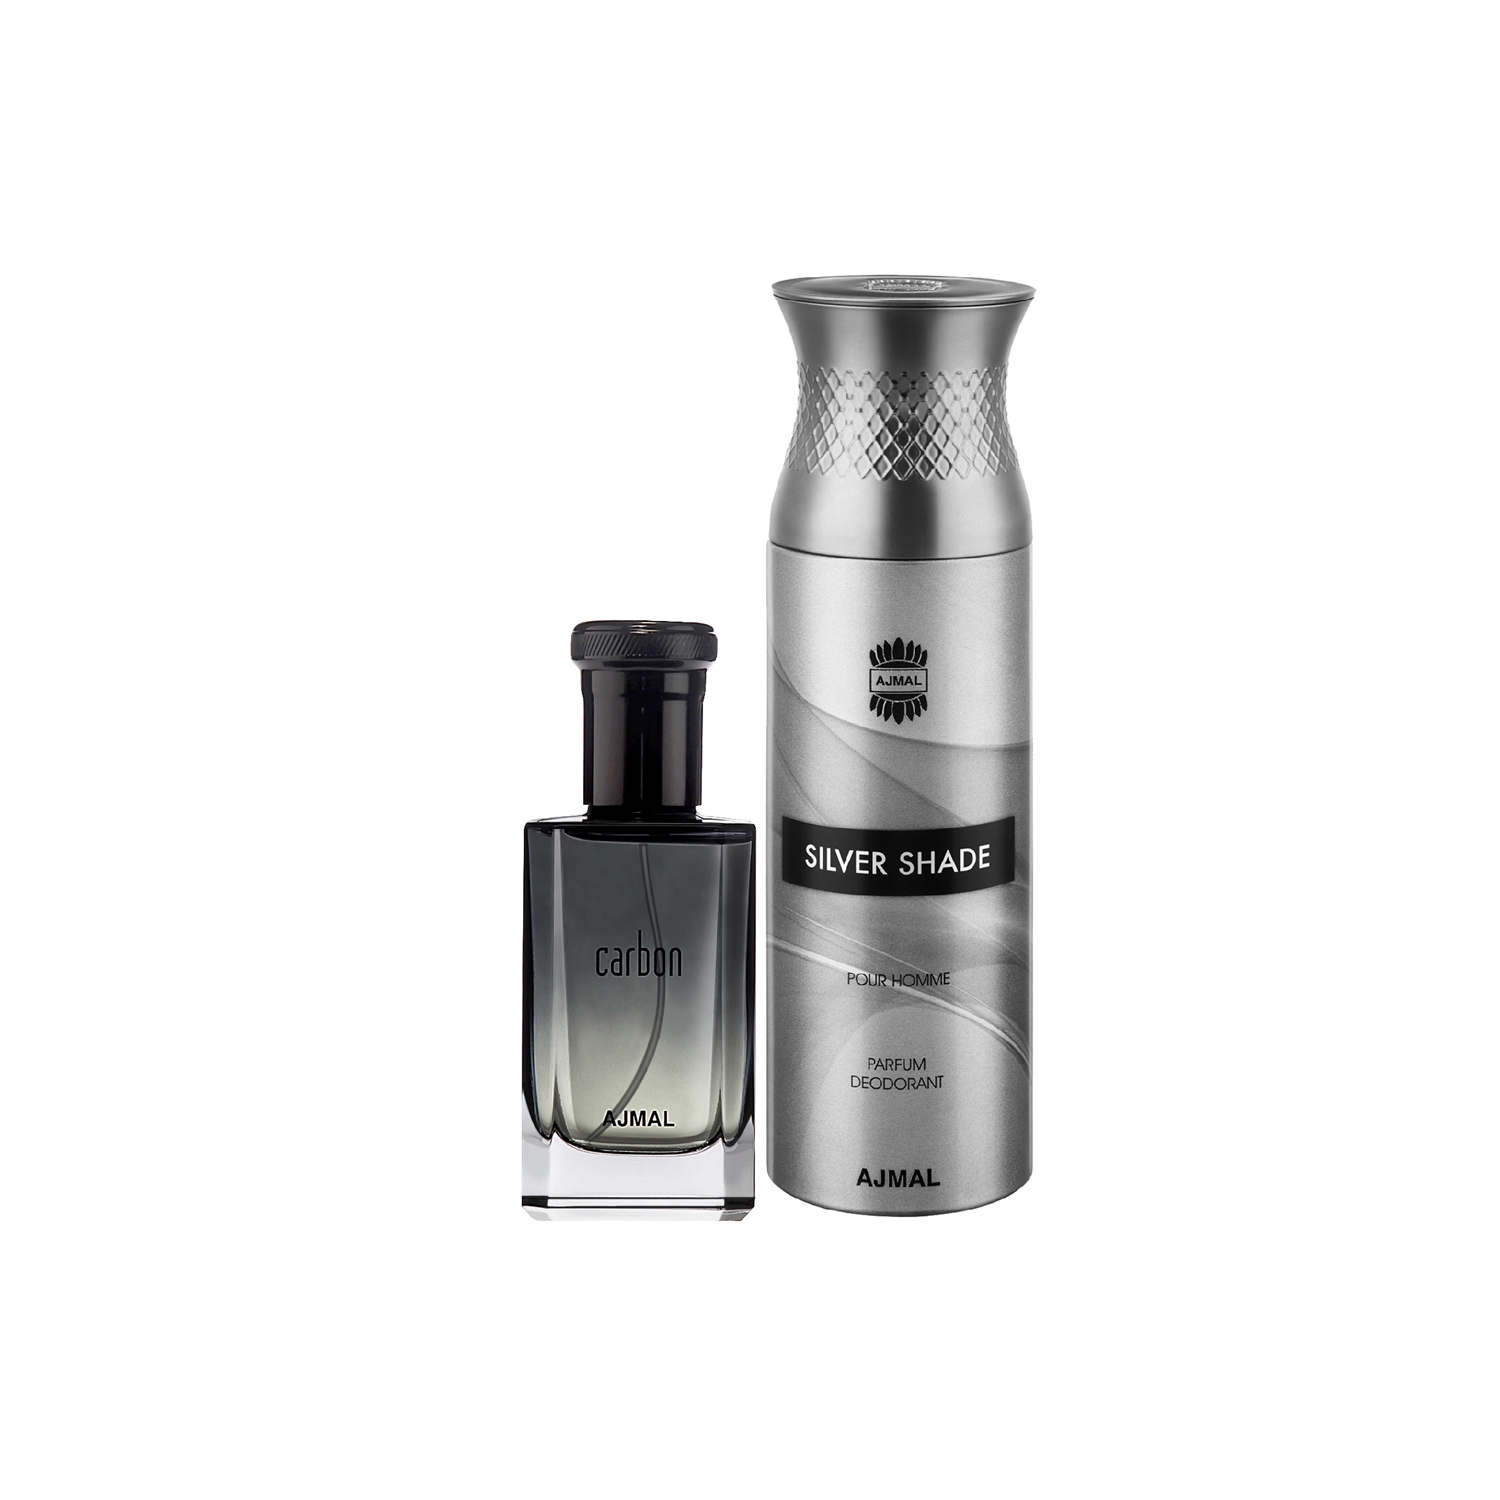 Ajmal | Ajmal Carbon EDP Citrus Spicy Perfume 100ml for Men and Silver Shade Homme Deodorant Citrus Woody Fragrance 200ml for Men+ 2 Parfum Testers FREE